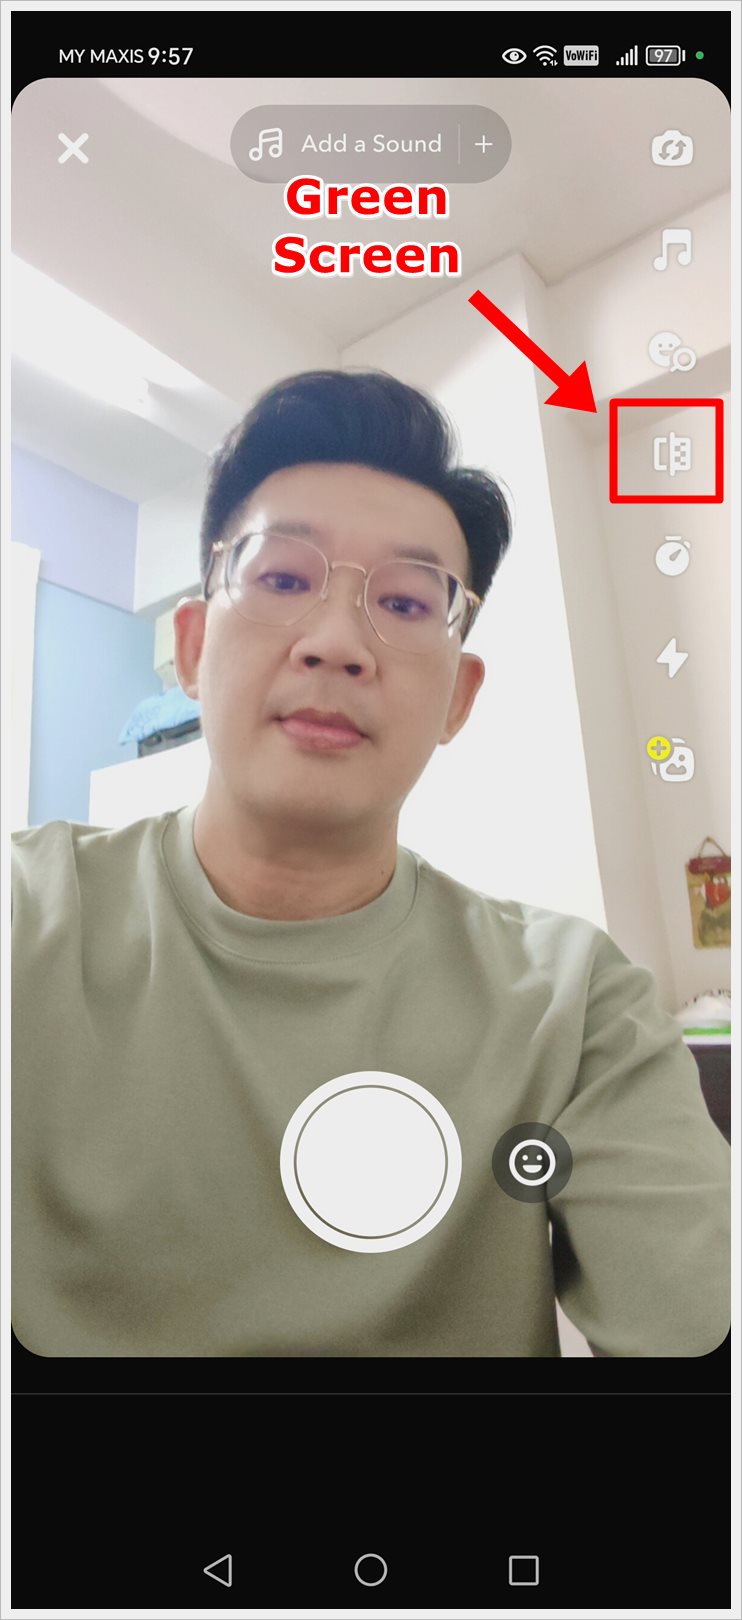 This mobile screenshot displays Snapchat's Director Mode, with the Green Screen feature highlighted.